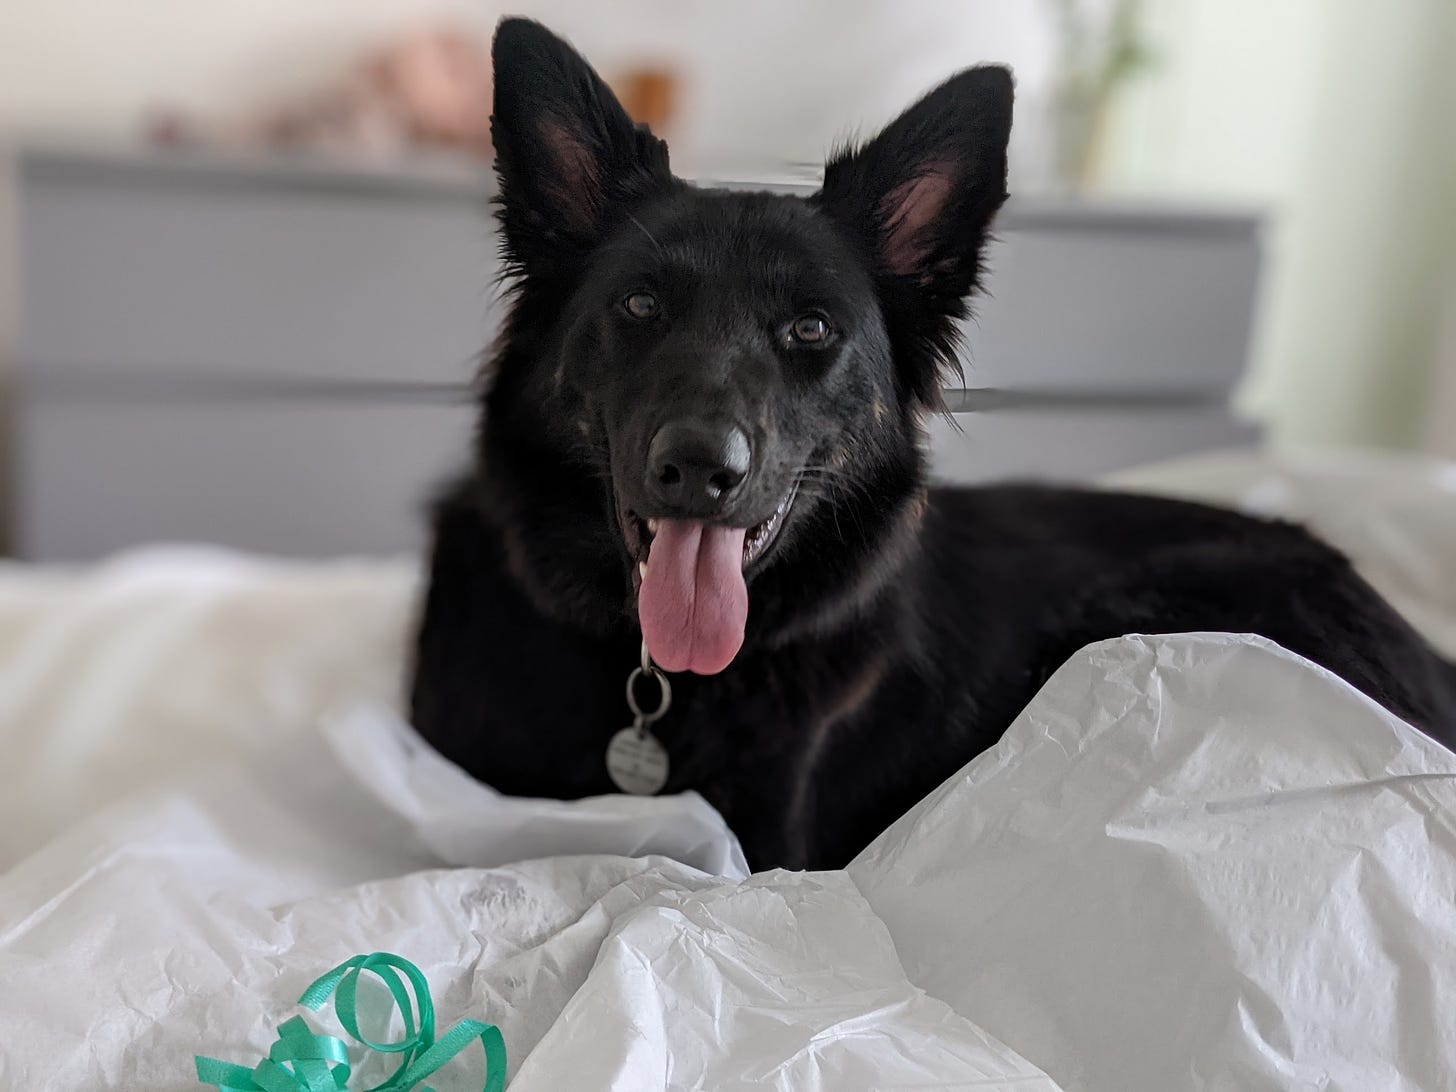 Zoey giving a big smile, sprawled out on white sheets on top of some wrapping paper. About a year ago.